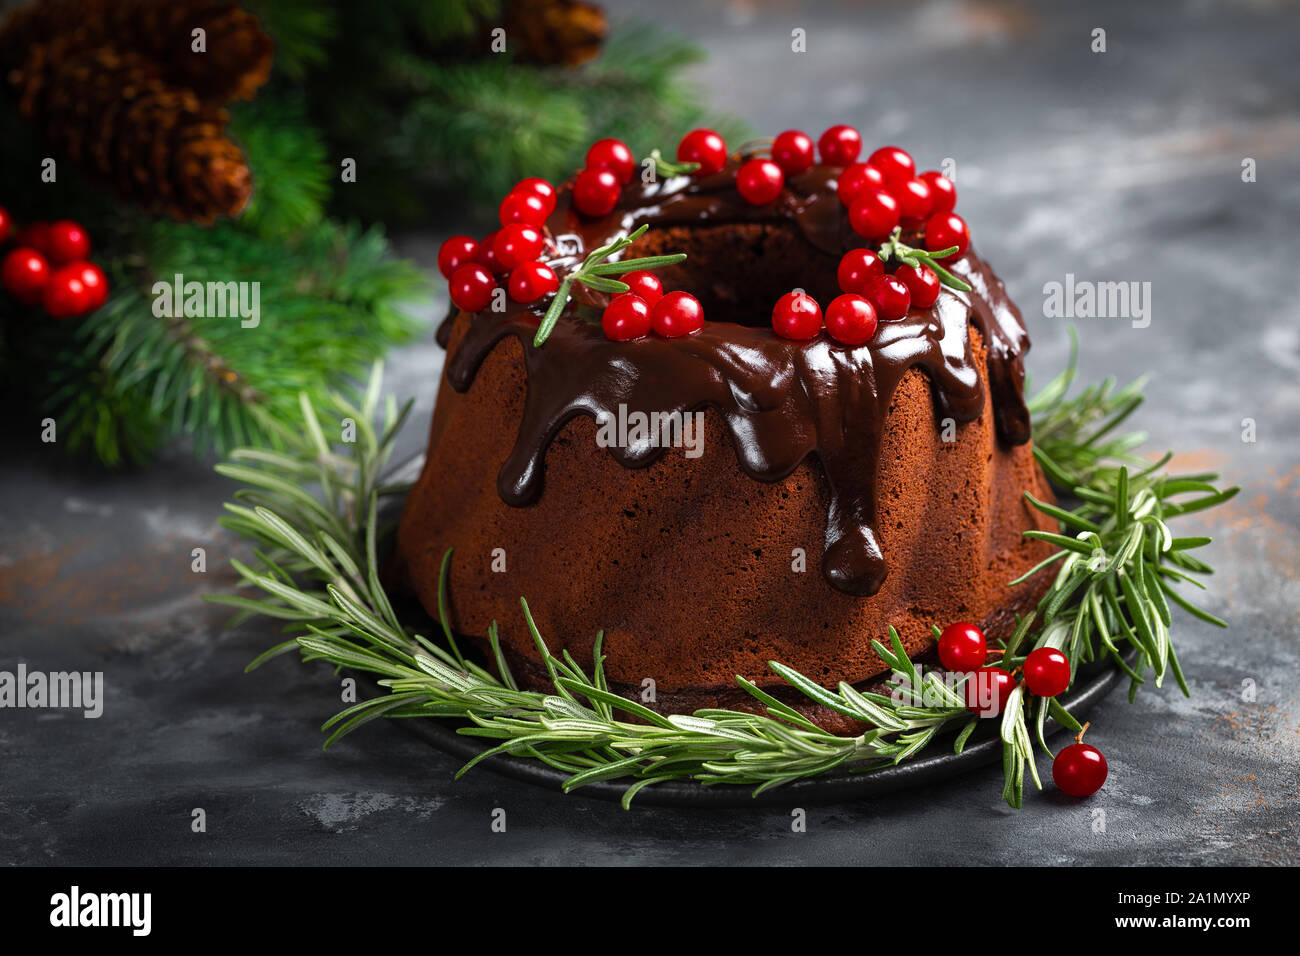 Christmas Chocolate Bundt Cake With Glaze Decorated With Fresh Berries And Rosemary Winter Baking At Xmas Or New Year With Decorations On Dark Backgr Stock Photo Alamy